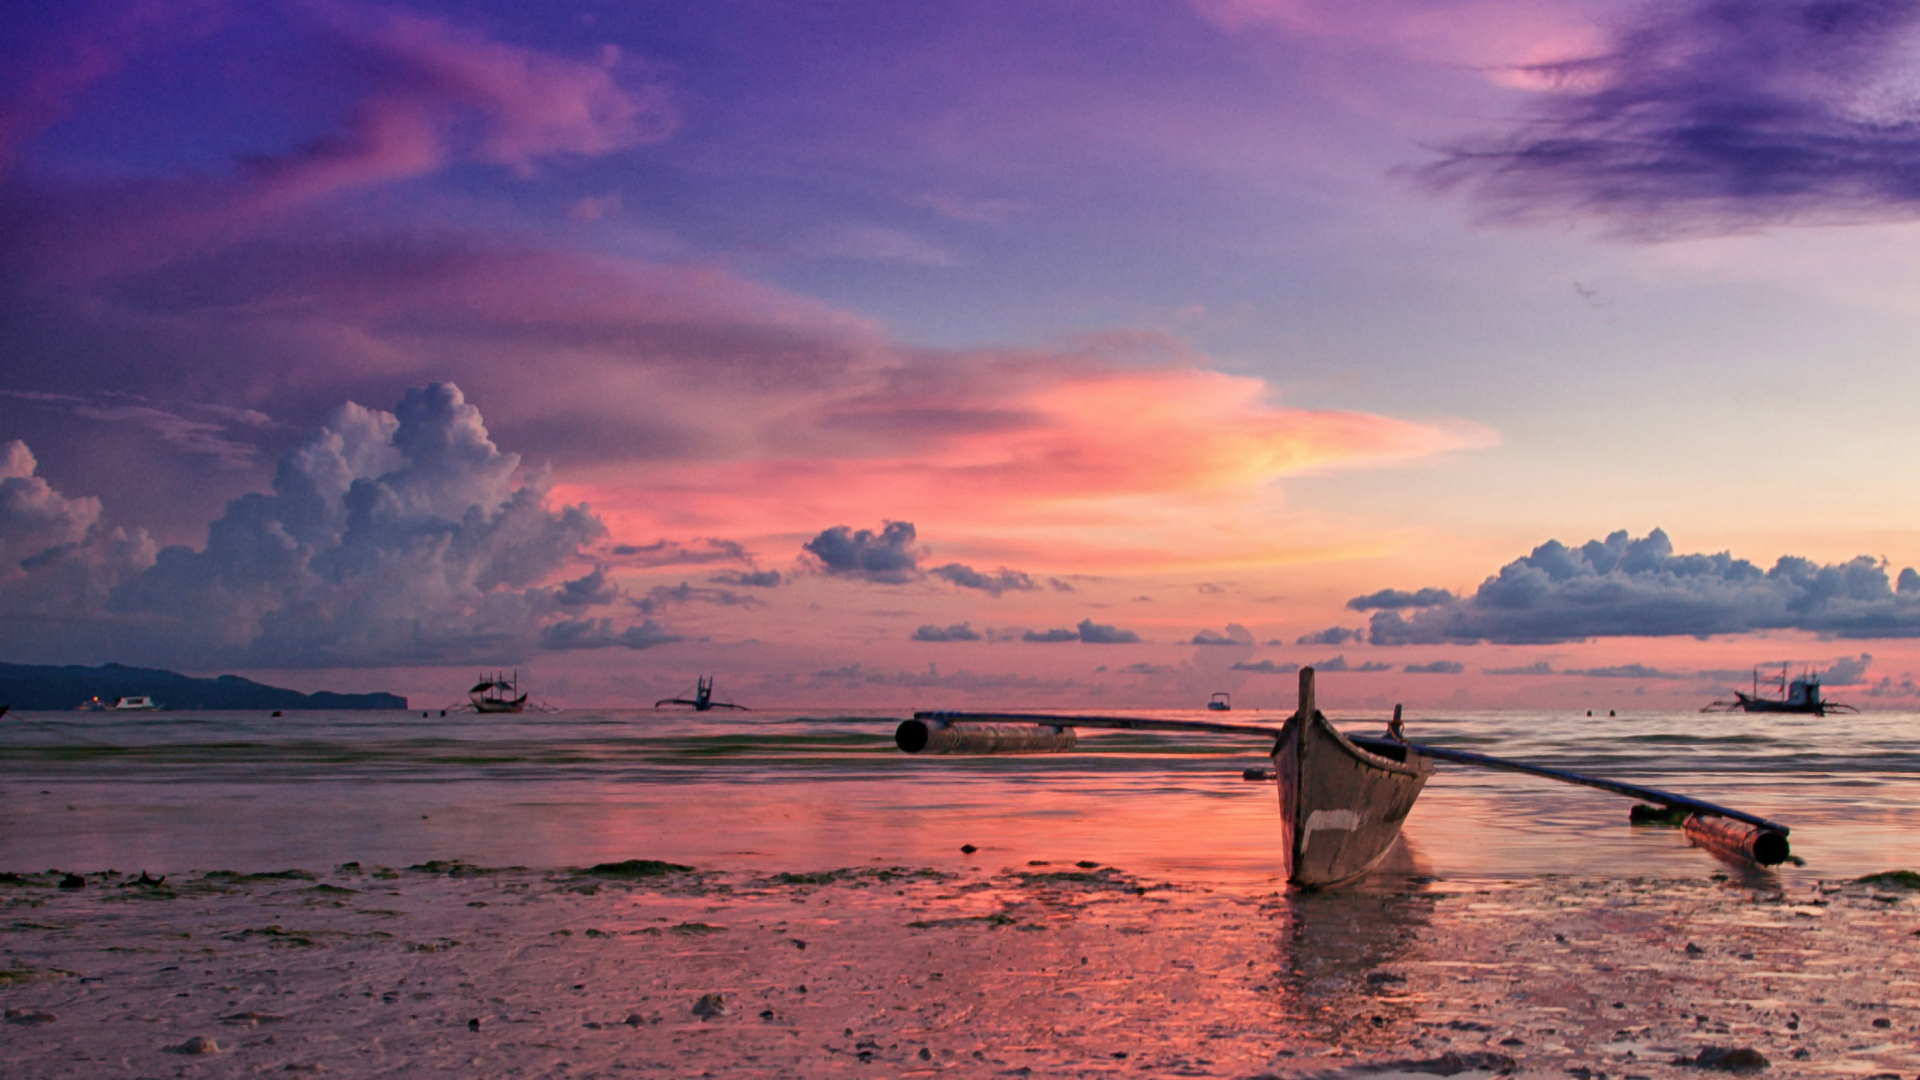 Fondo de pantalla Pink Sunset And Boat At Beach In Philippines 1920x1080